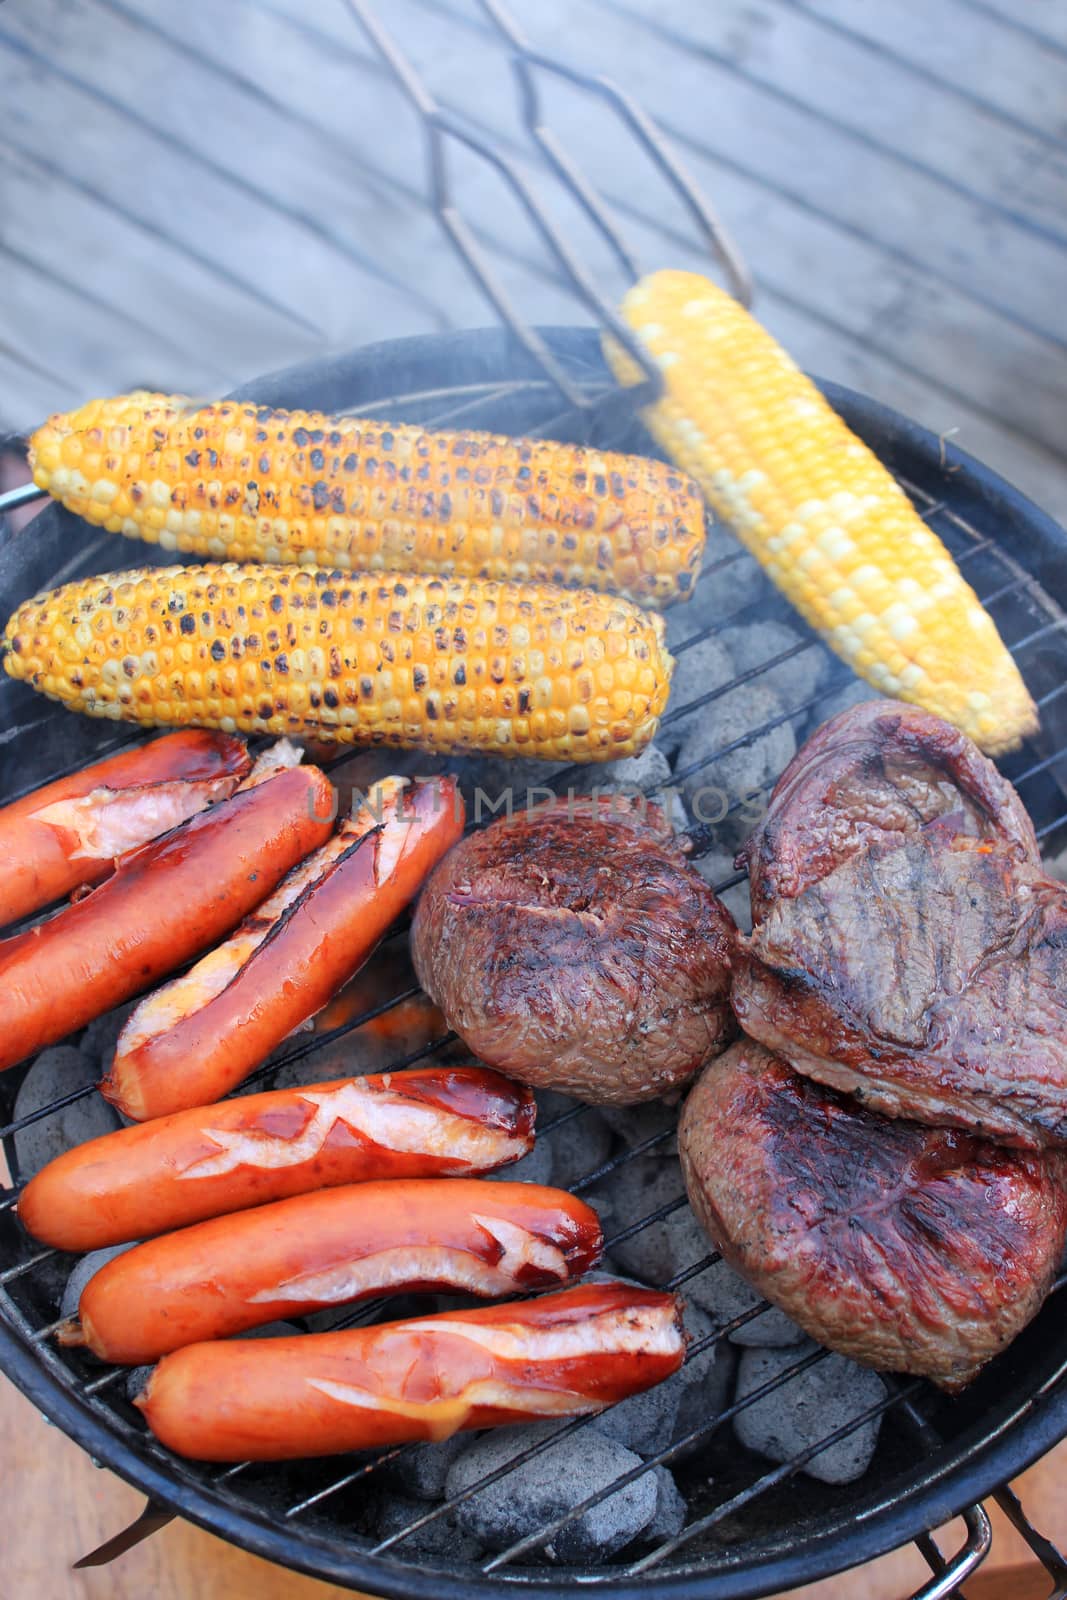 Smokey barbecue cooking on coals in the great outdoors consising of corn on the cob, round steak, and sausages